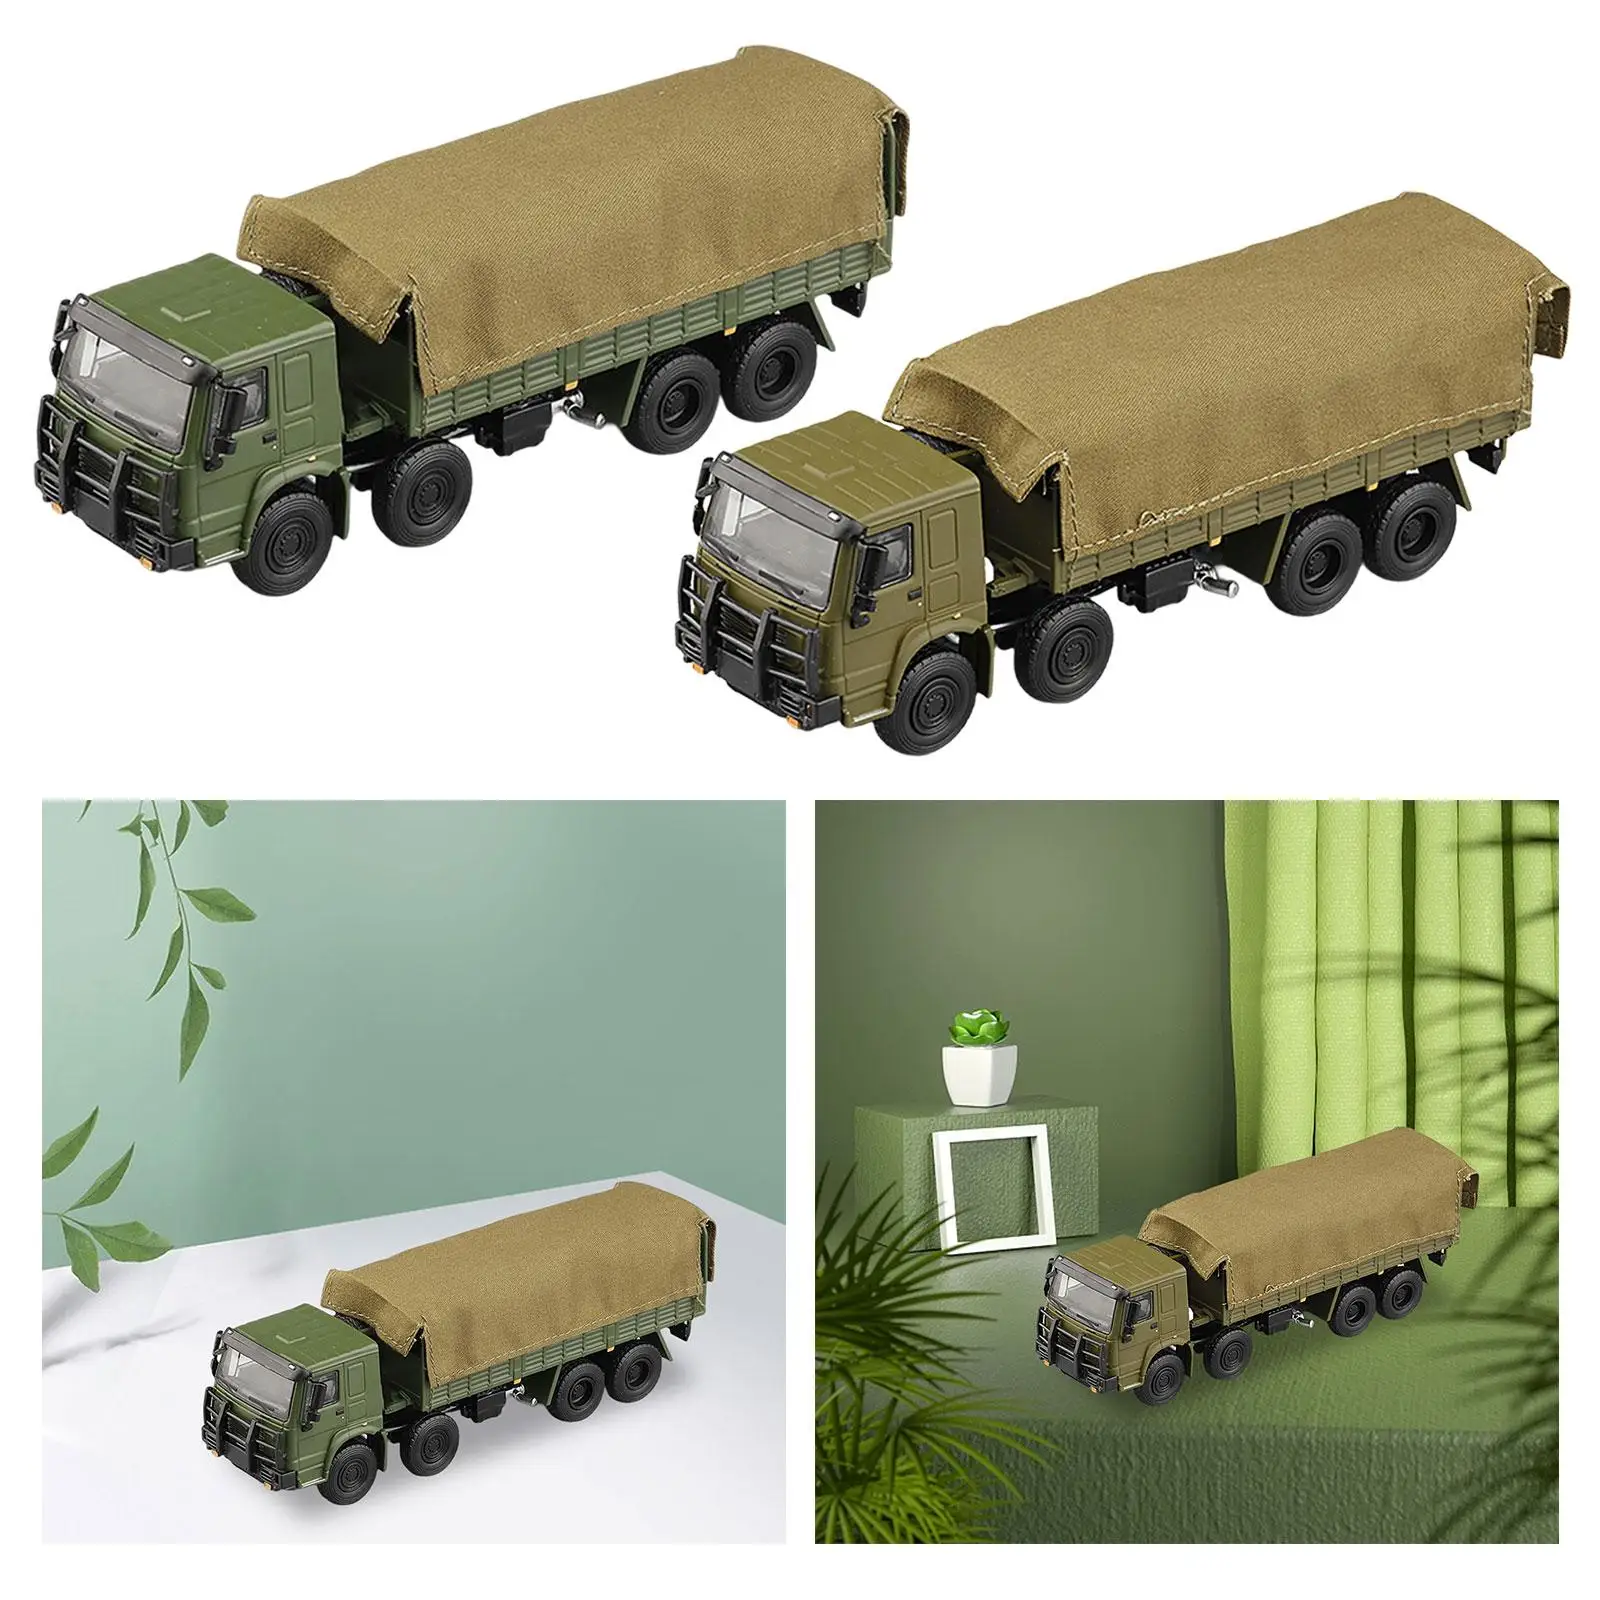 1/64 Transport Truck Sand Table Ornament Diecast Toys Alloy Car Model for Photography Props Scenery Landscape Diorama Decoration